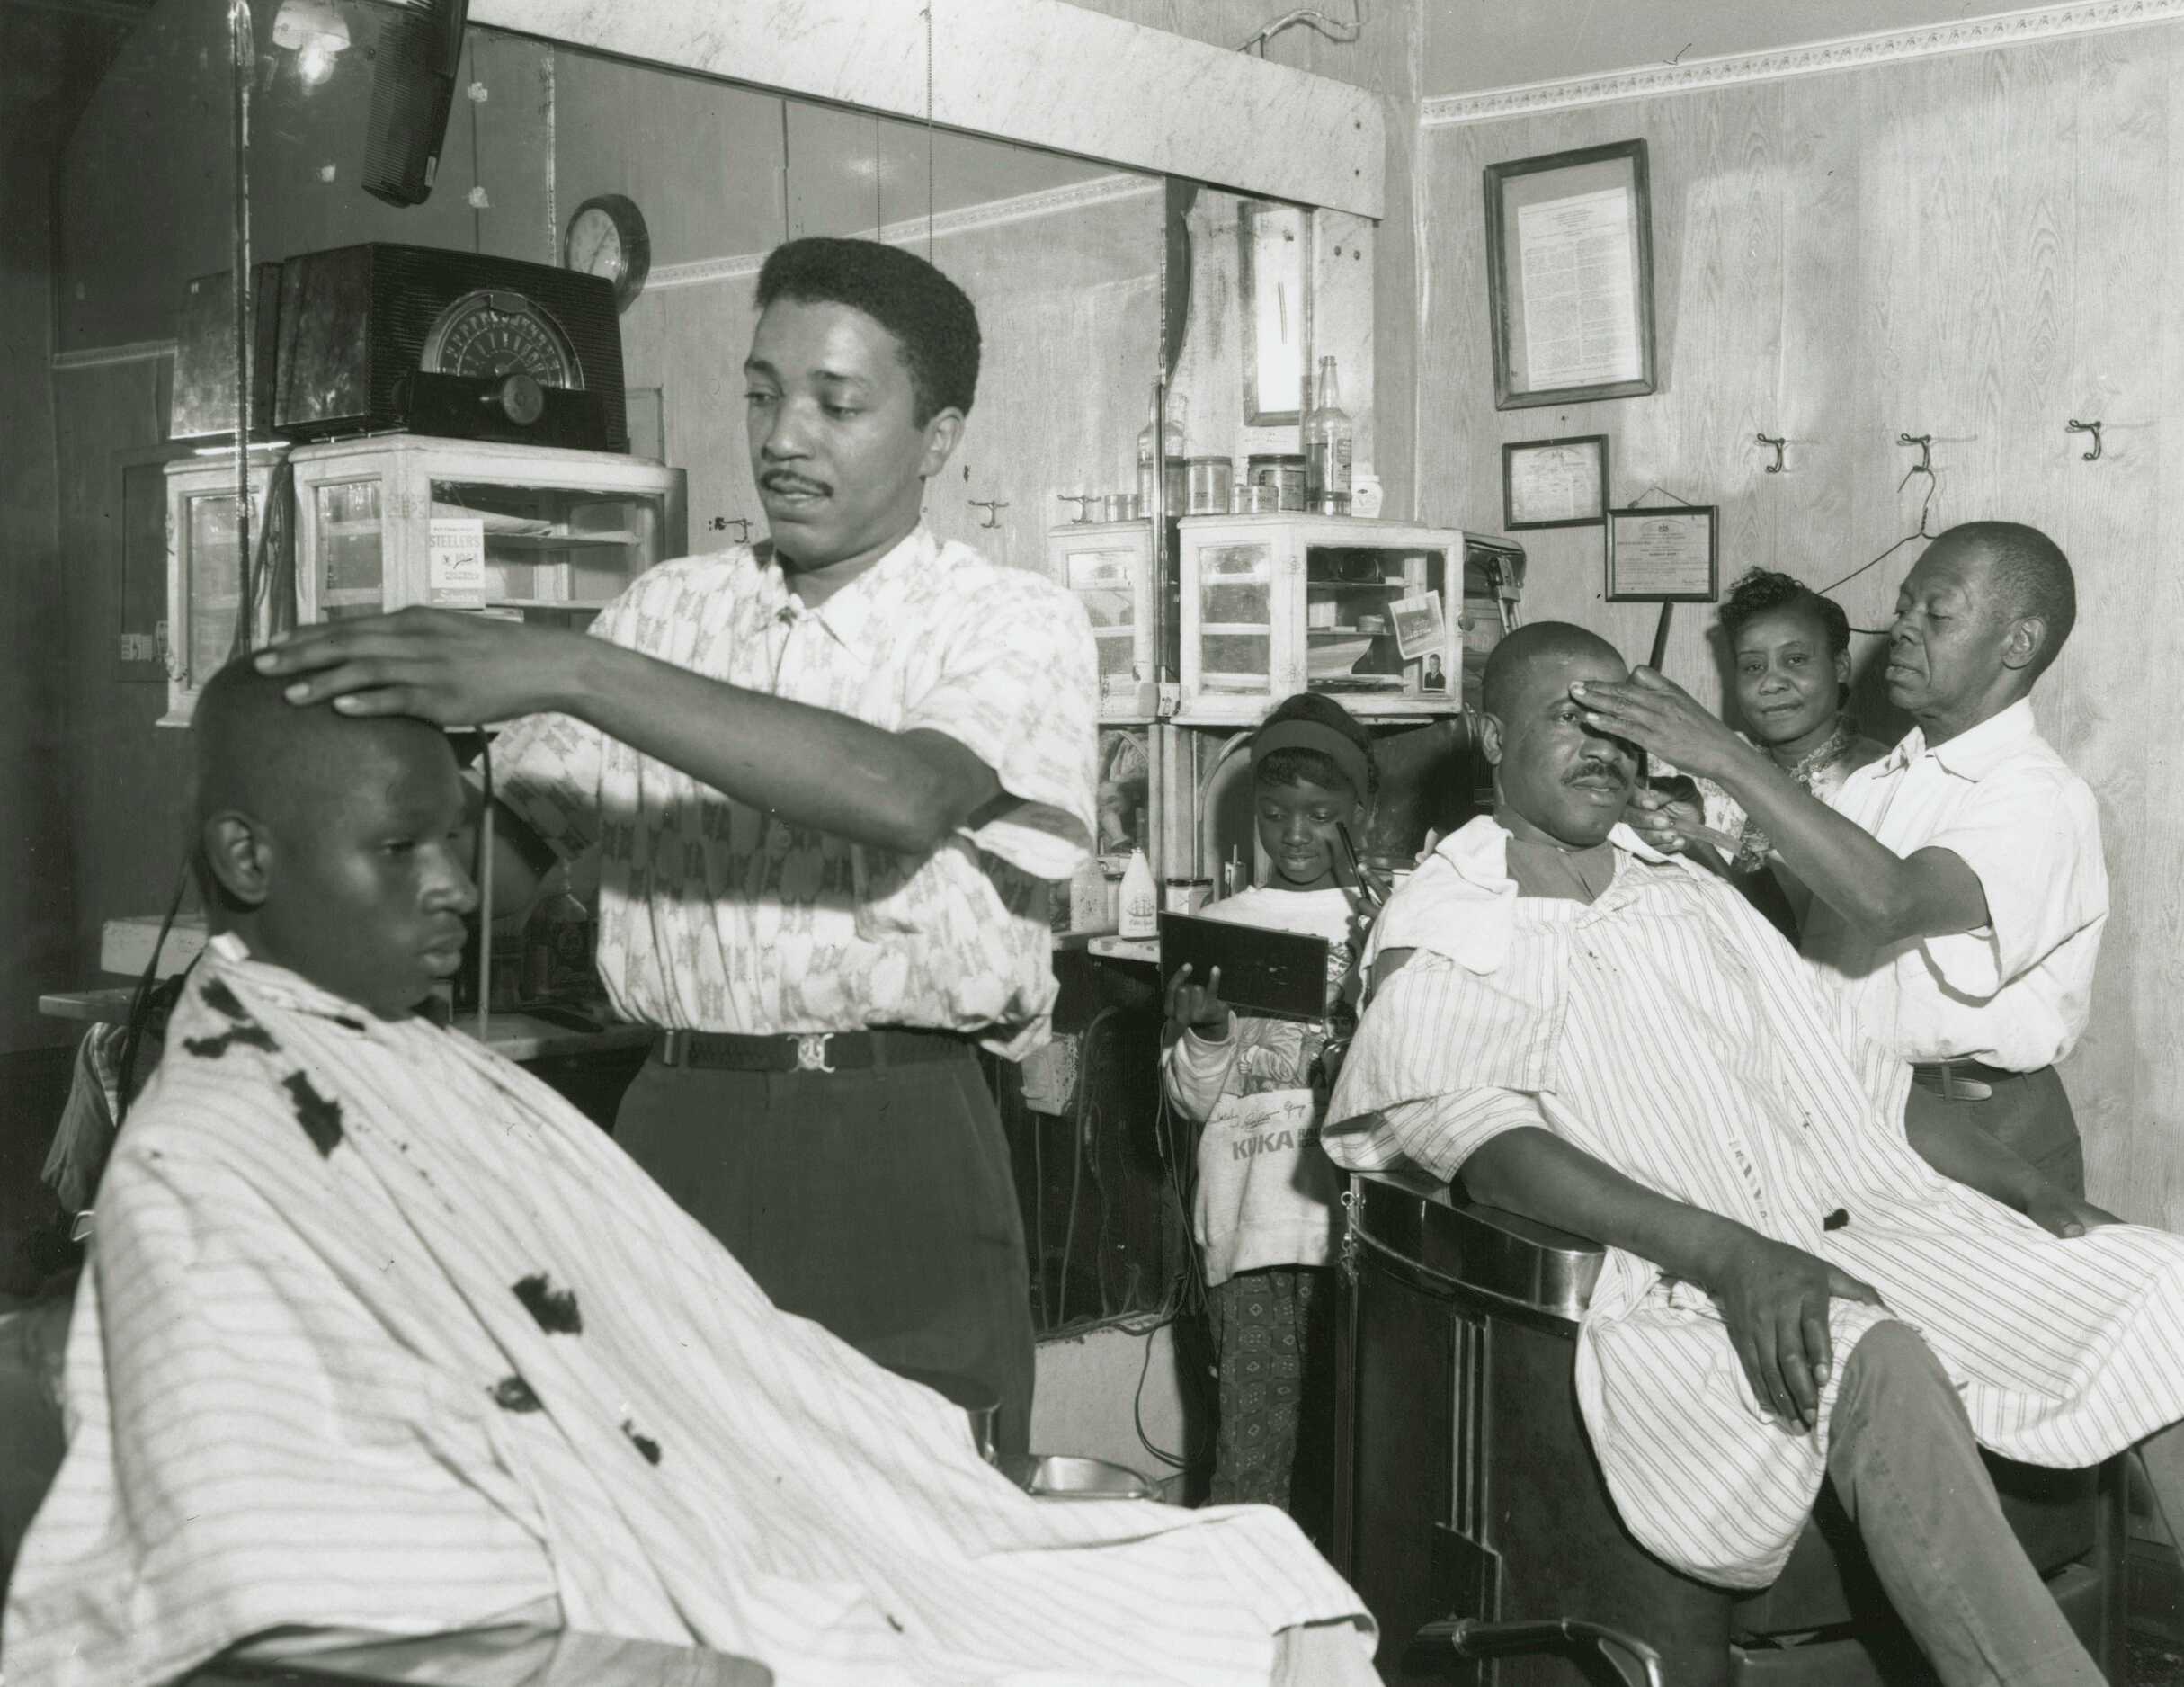 A black and white photograph of Johnny Gator's barbershop.